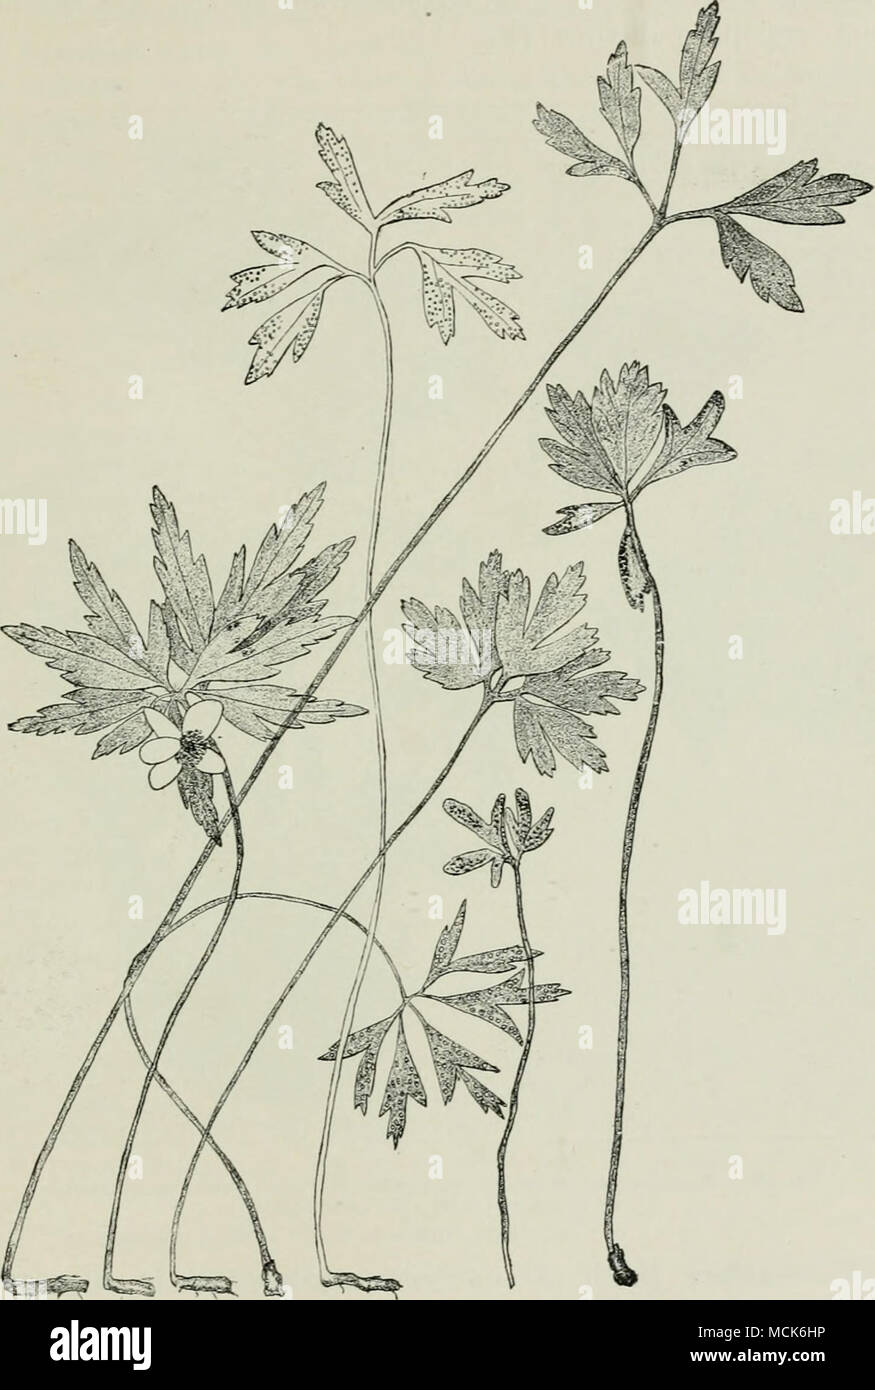 . Fig. 190.—Anemov.e-Rv.sl. 2 and 3, Normal pUmts of Anemone ranv.ncv.loid.es. 4, A'cidiuiii punctatuiii on Anemone ranuncuioides ; aecidia on the lower surface of the leaf; the plants are abnormally elongated, and the leaf-segments are smaller. 6 and 7, Pv.ccinia j'usca on Anemone nemorosa ; the plants rem lin small, 6 is completely deformed, 7 partially. 1 and 5, Aecidium lev.cosiwmum on An-mune nemorosa; the plants are abnormally elongated and the leaf-segments smaller, (v. Tubeuf del.) Stock Photo